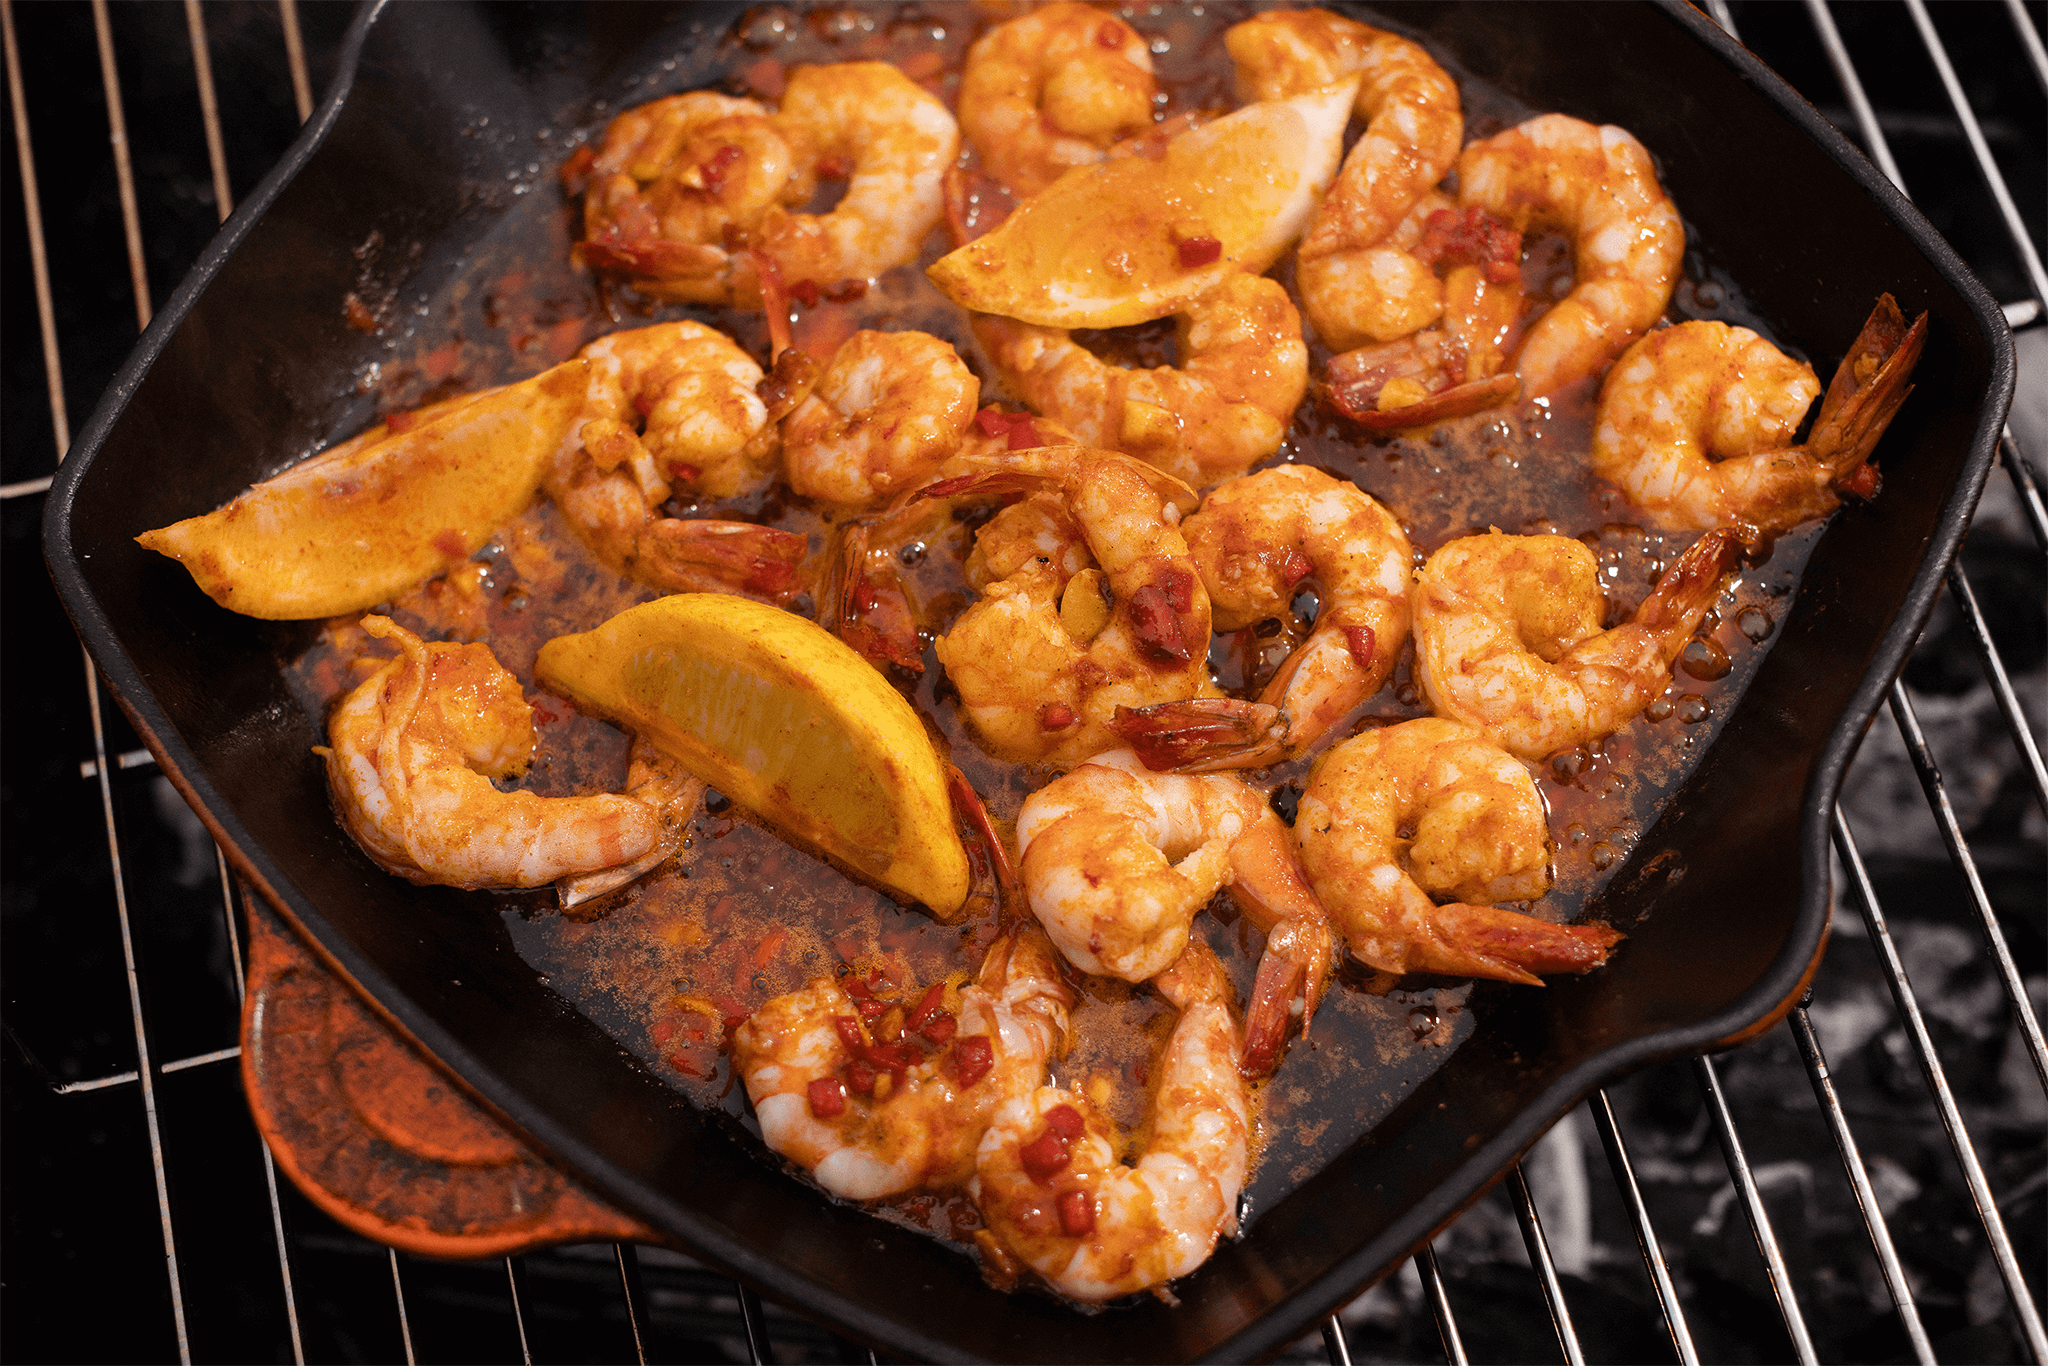 Sizzling maple king prawn in a skillet on a grill